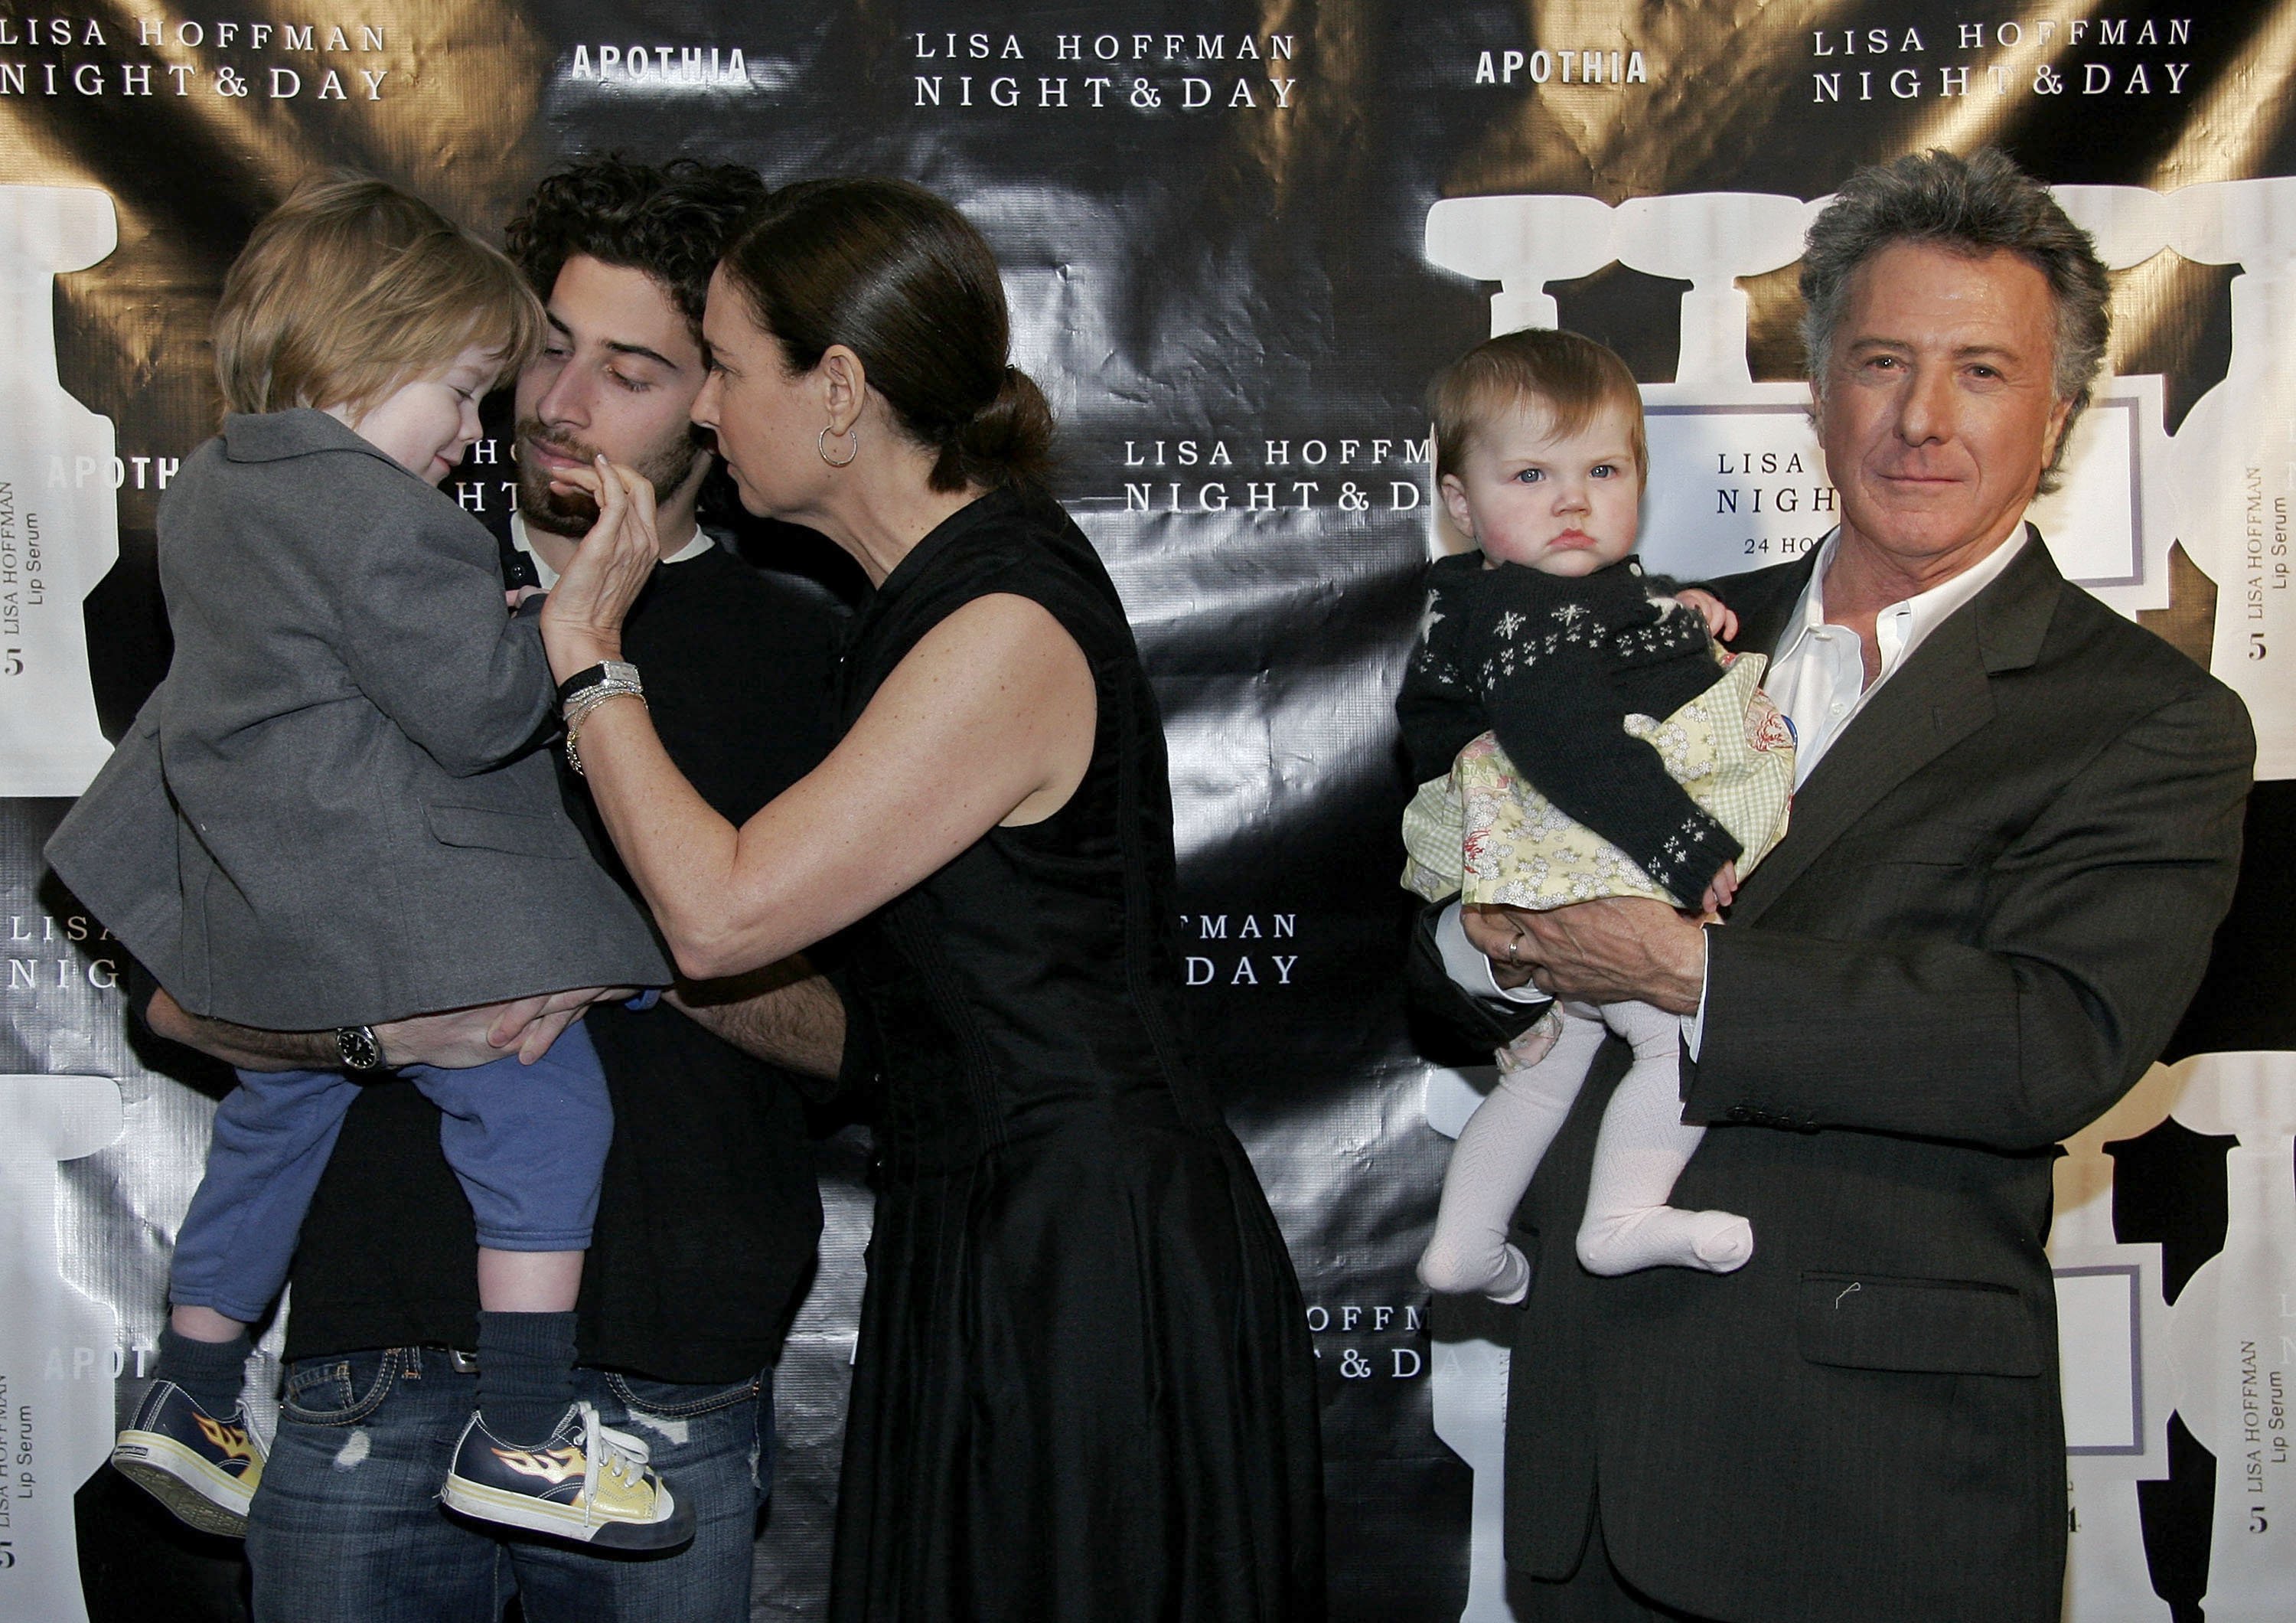 Grandson Gus, actor Jake Hoffman, founder Lisa Hoffman of Night & Day 24 hour Skincare, granddaughter Daisy Jo, and actor Dustin Hoffman at APOTHIA at Fred Segal Melrose on February 21, 2007 in Los Angeles, California. | Source: Getty Images